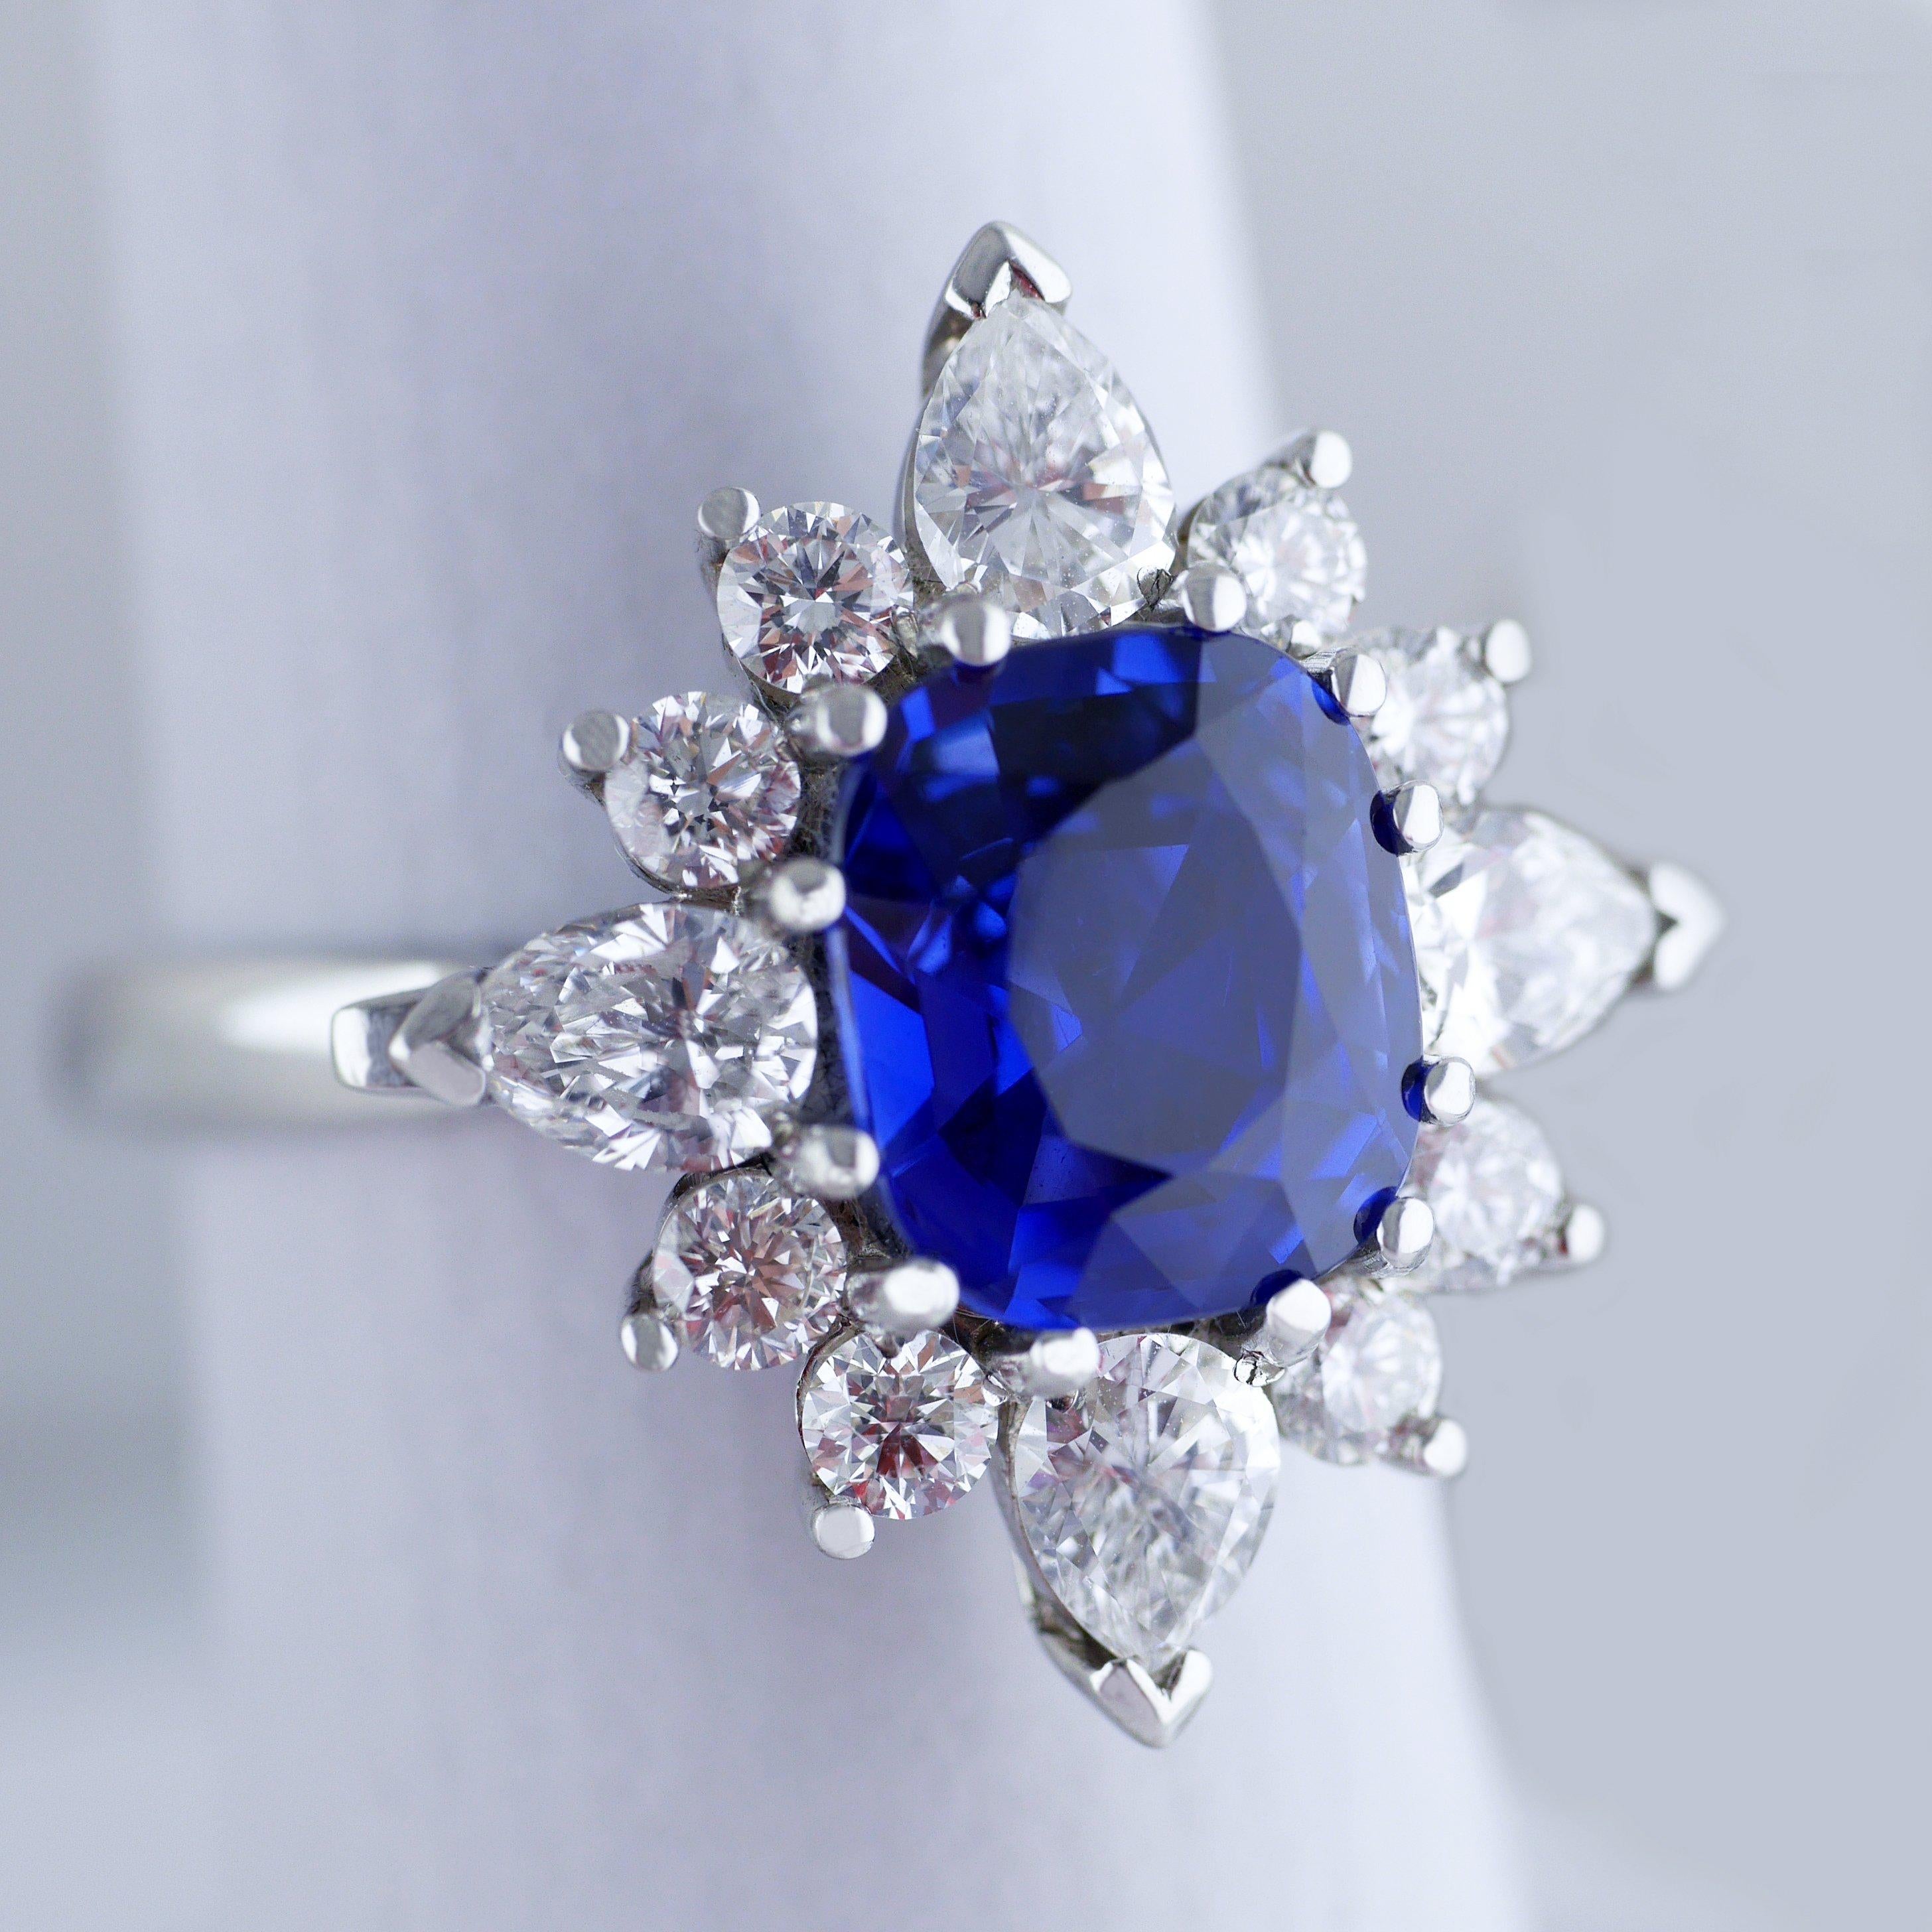 Vintage ring with a fine and lively natural untreated blue sapphire, handmade in England, circa 1960.

Central transparent blue sapphire, rectangular cushion cut, weighing 3.75ct (Carat), certified, natural untreated colour. 

The sapphire